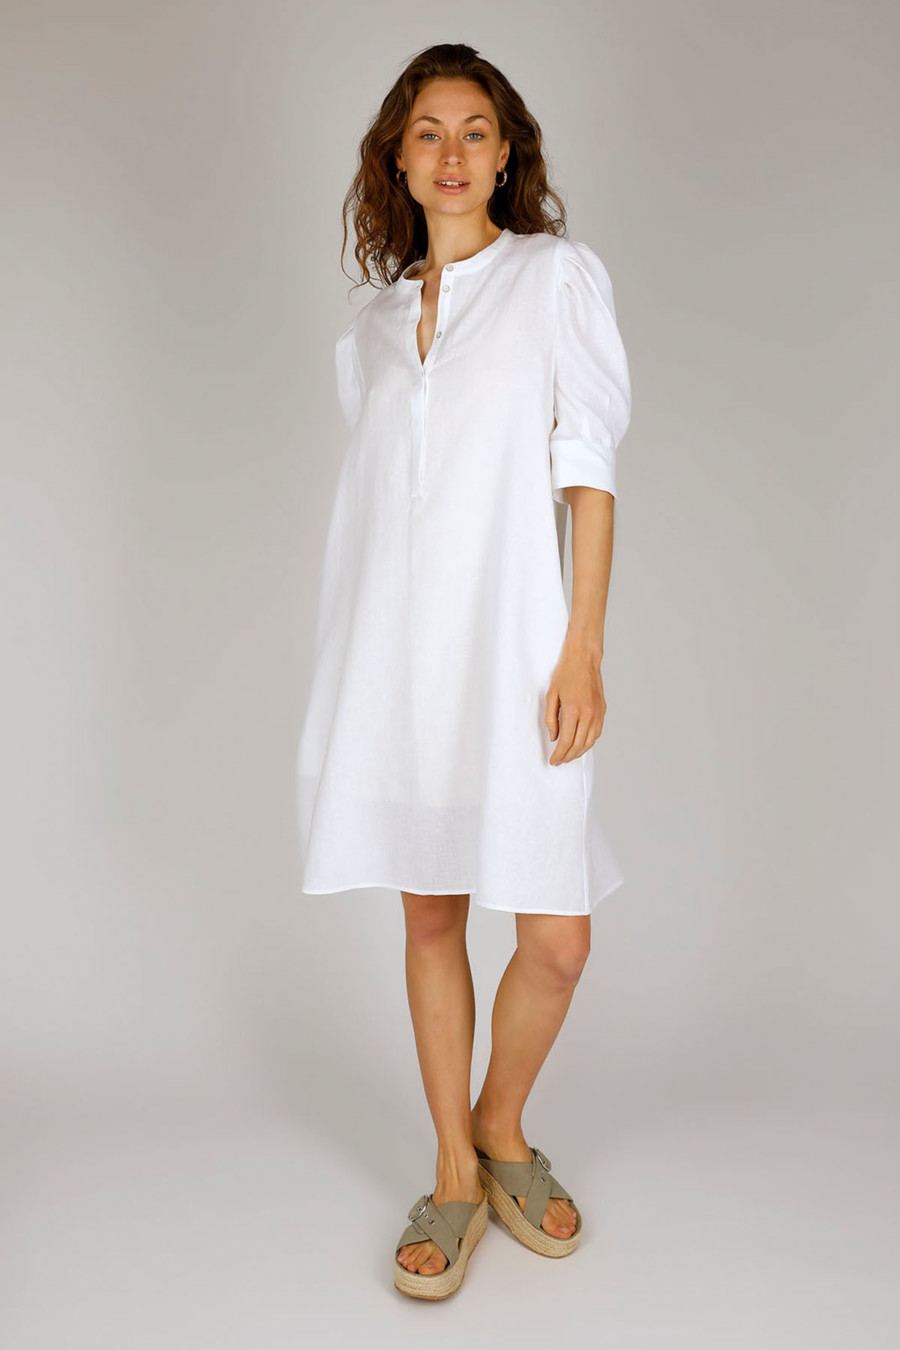 PHILIPA - Shirt blouse dress with puff sleeves - Colour: White